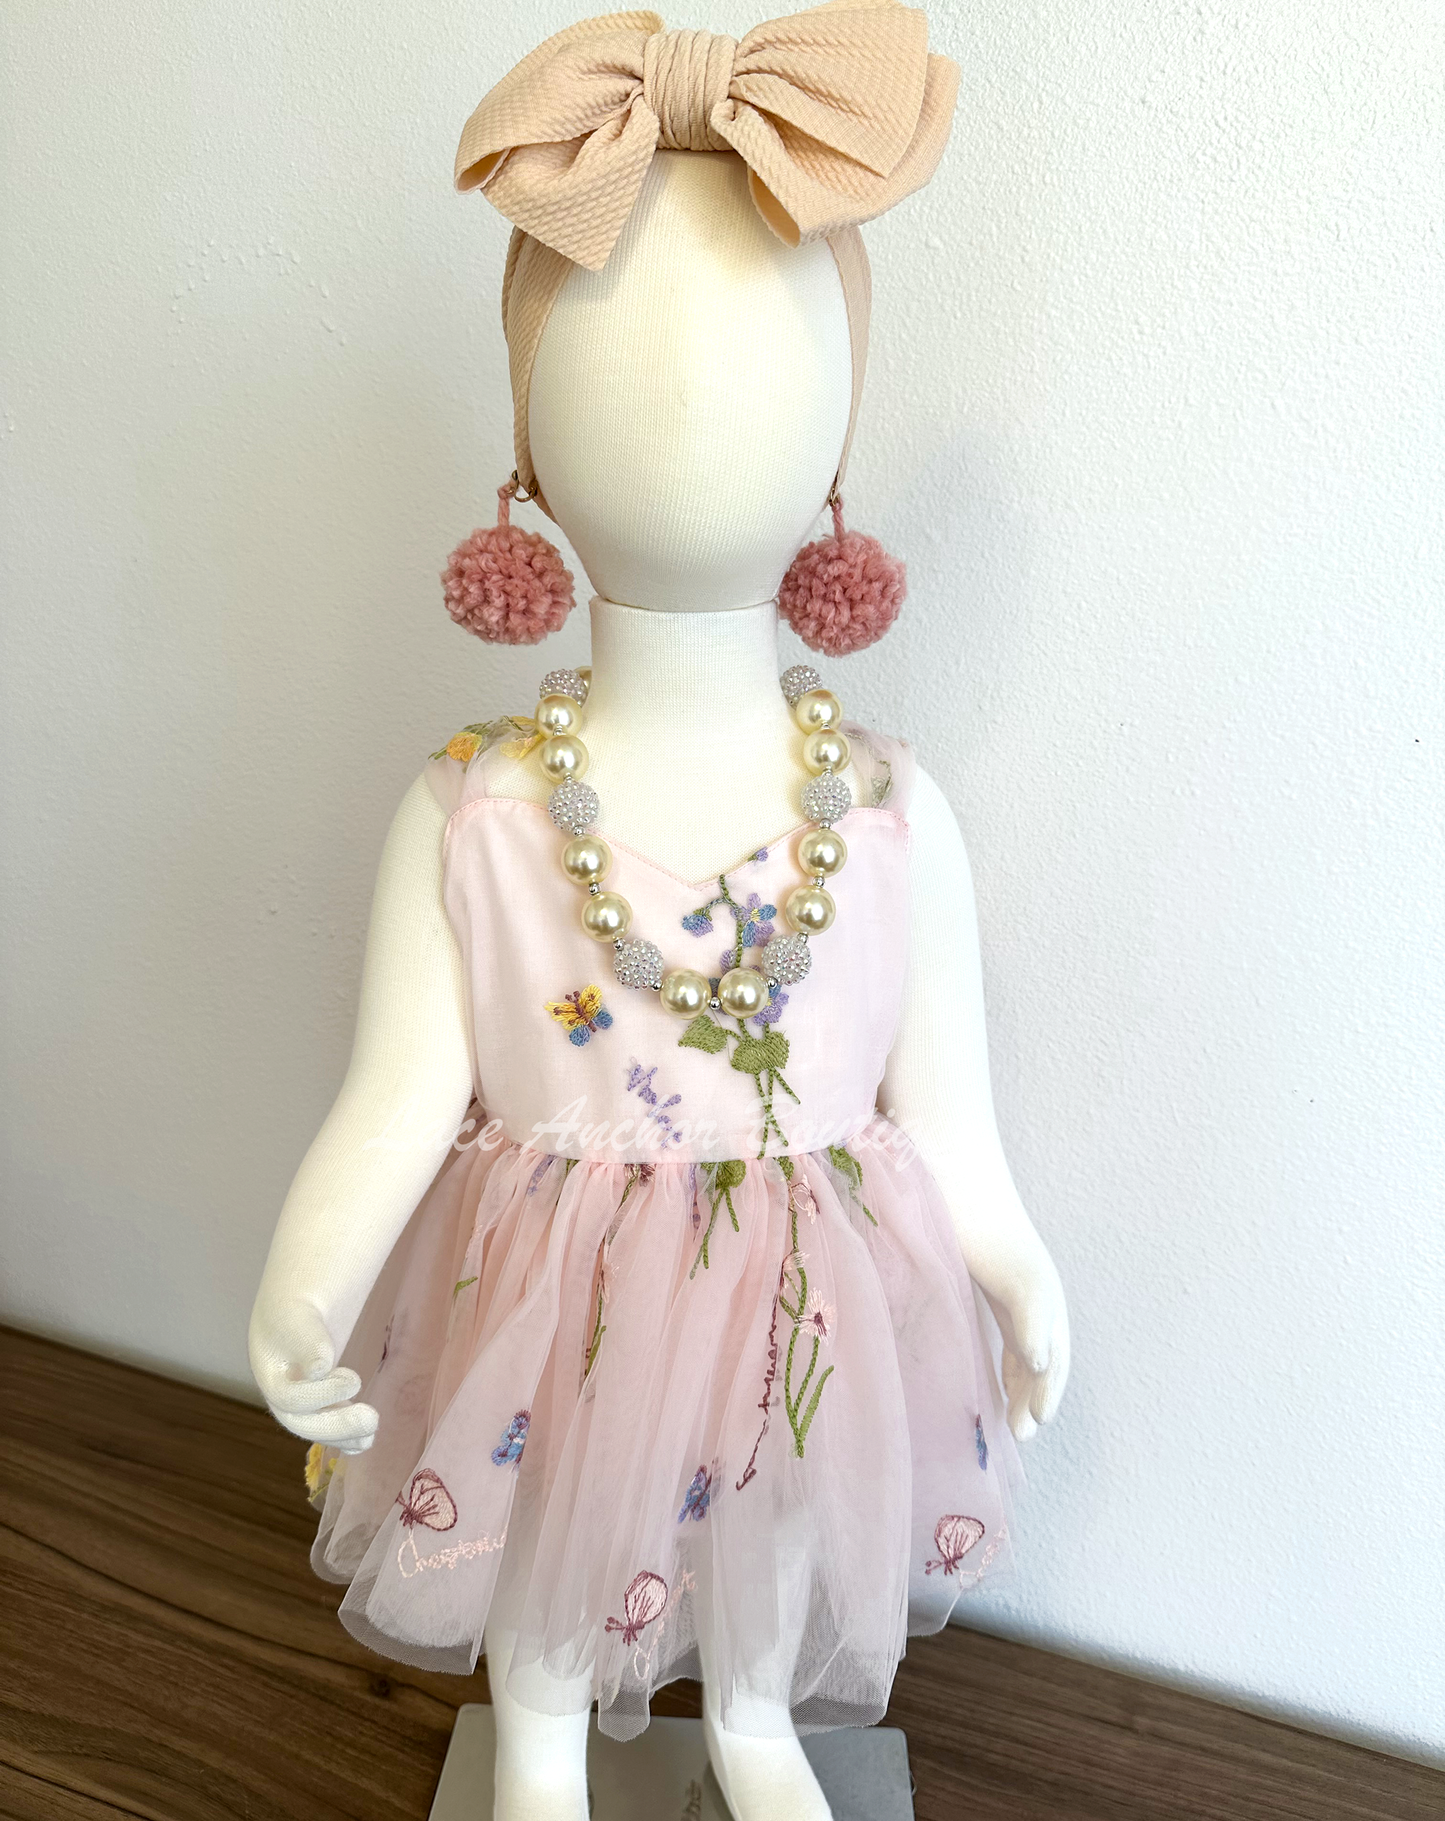 Baby girls romper with tied back fluffy bow. Outfits in light blush pink with embroidered floral print.